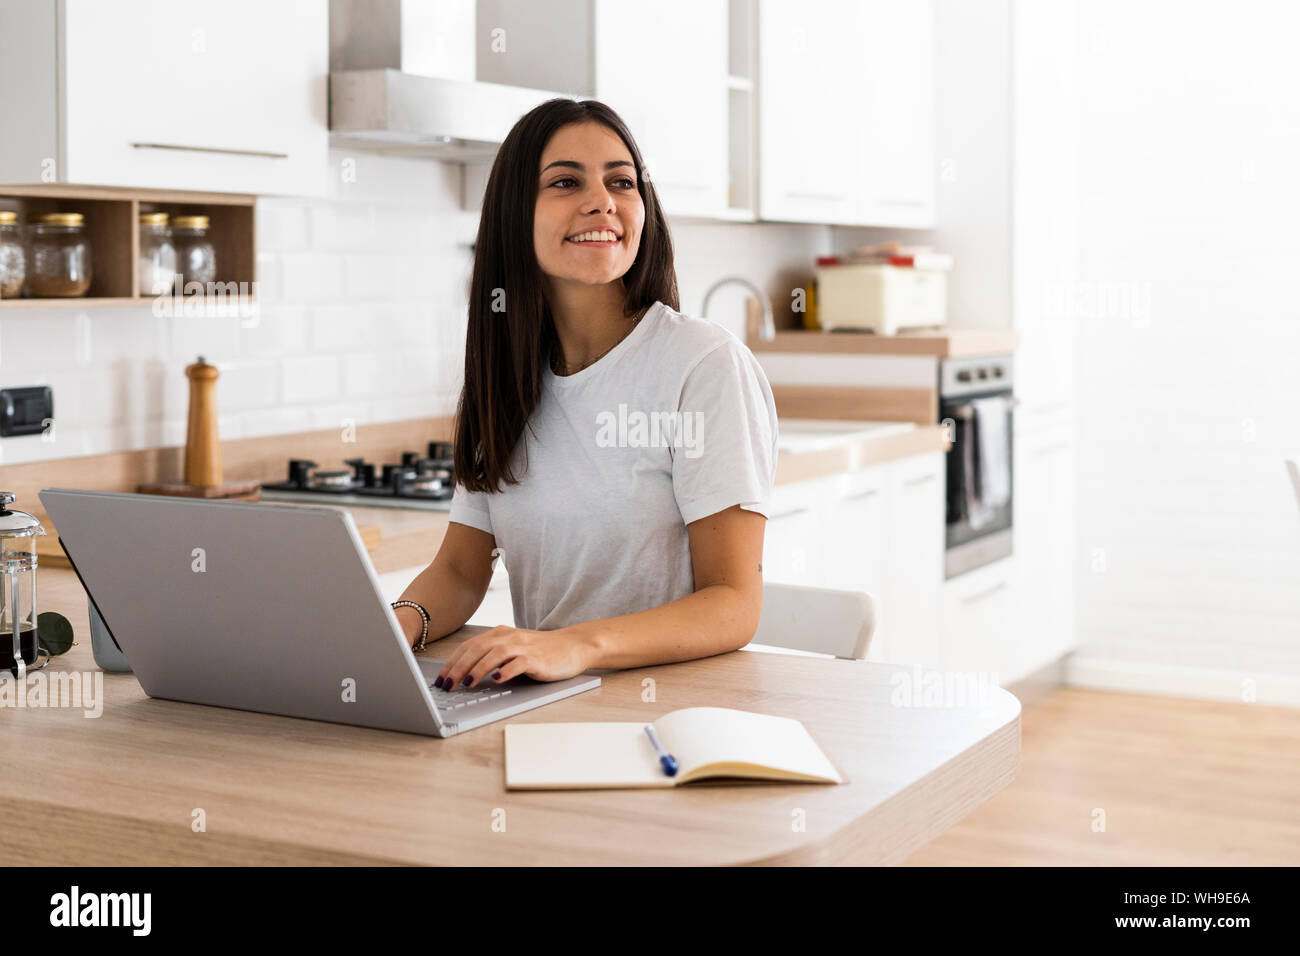 Smiling young woman using laptop at home Stock Photo